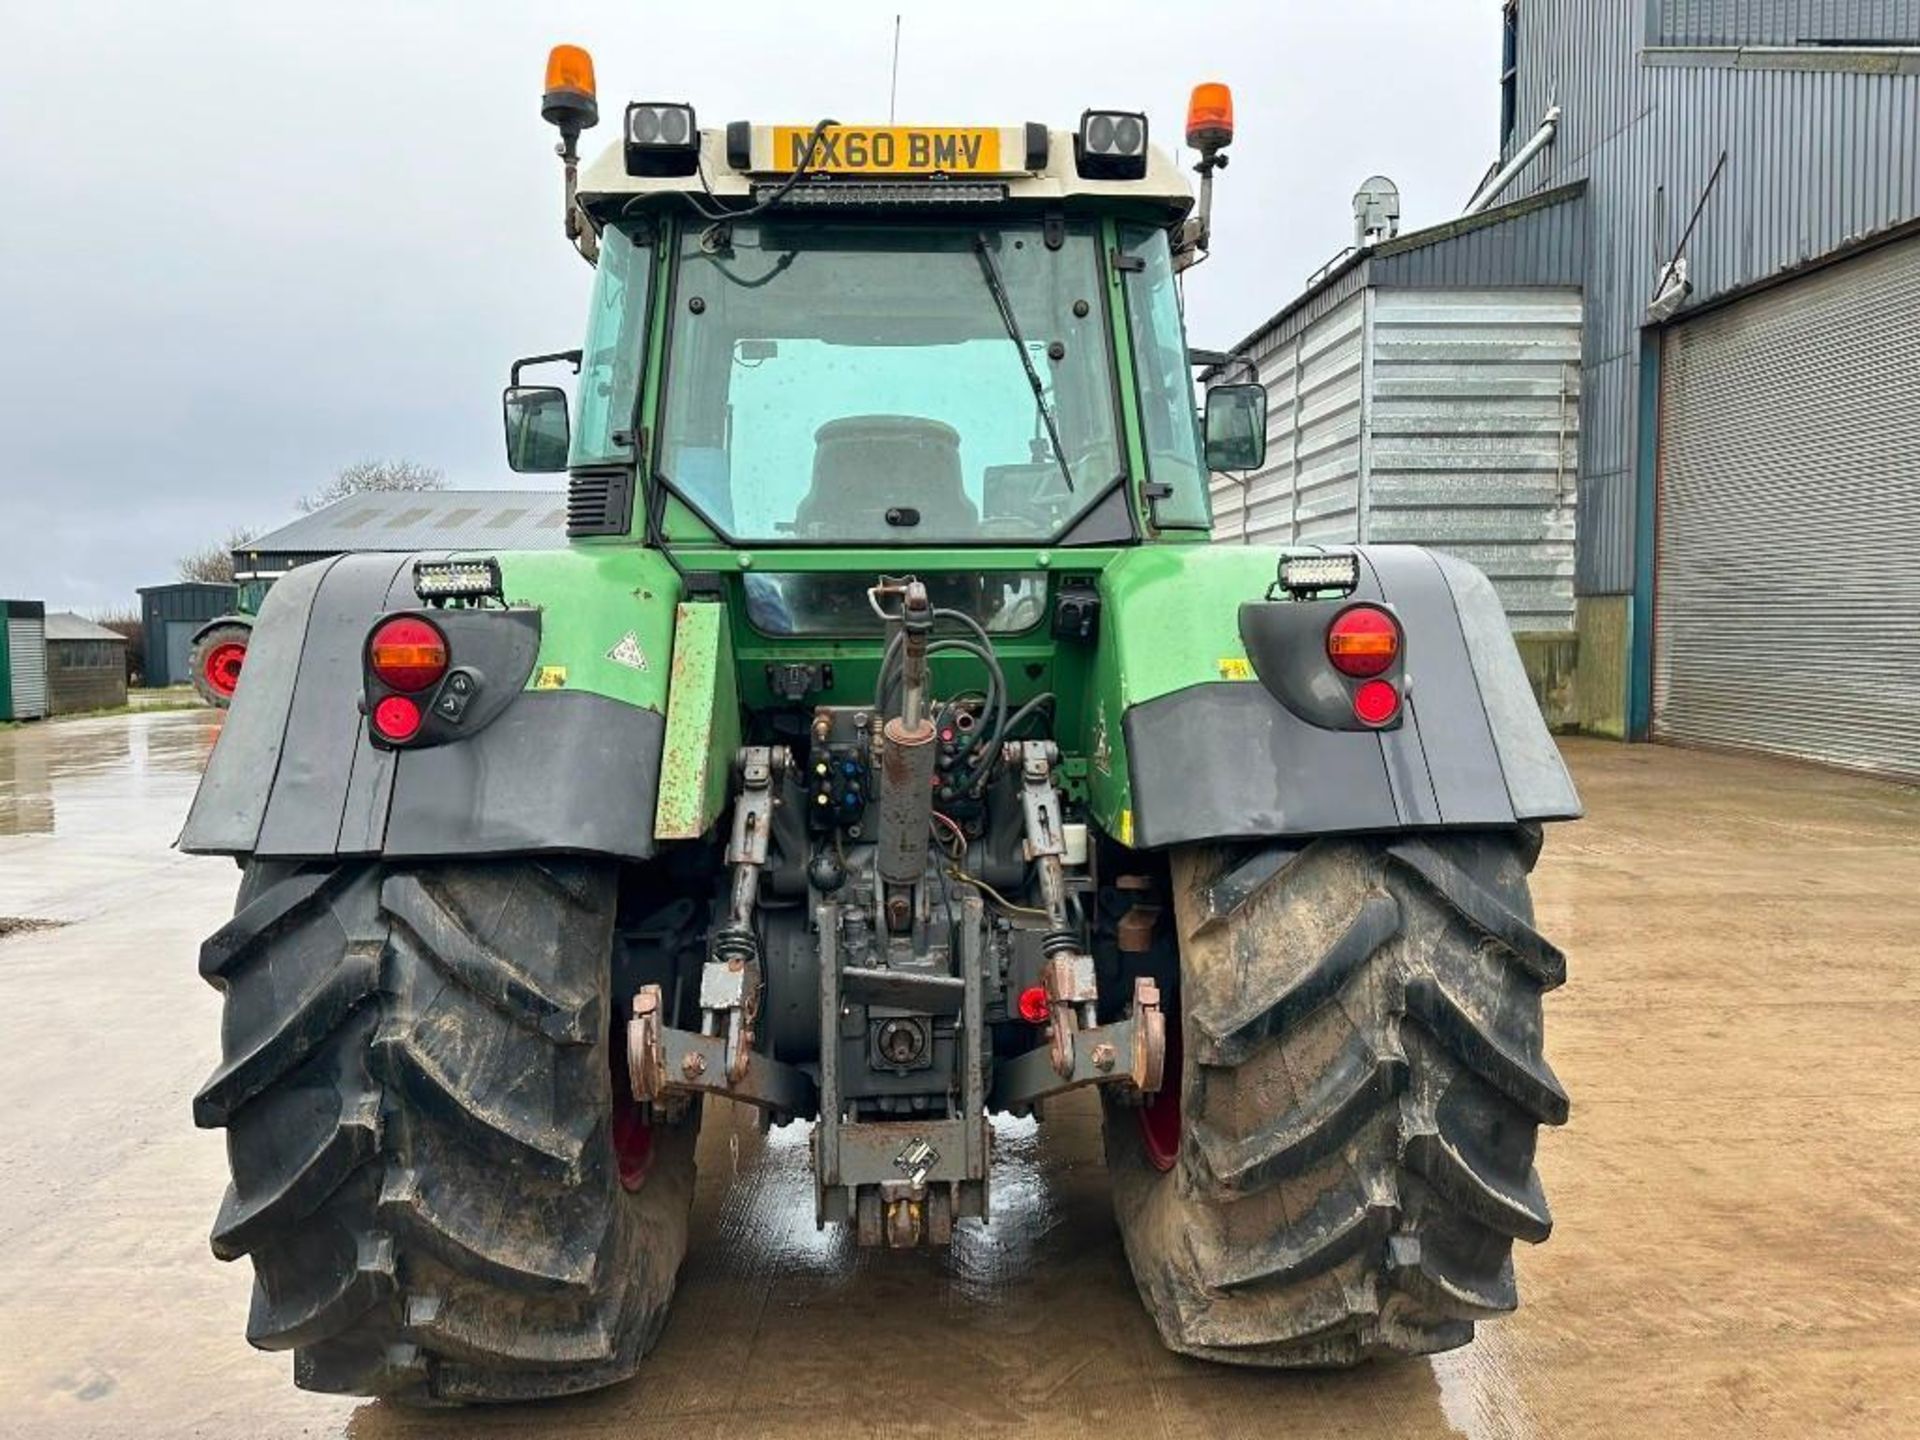 2010 Fendt 820 Vario TMS tractor, 4wd, front linkage, 4No spool valves, Bill Bennett pick up hitch. - Image 8 of 21